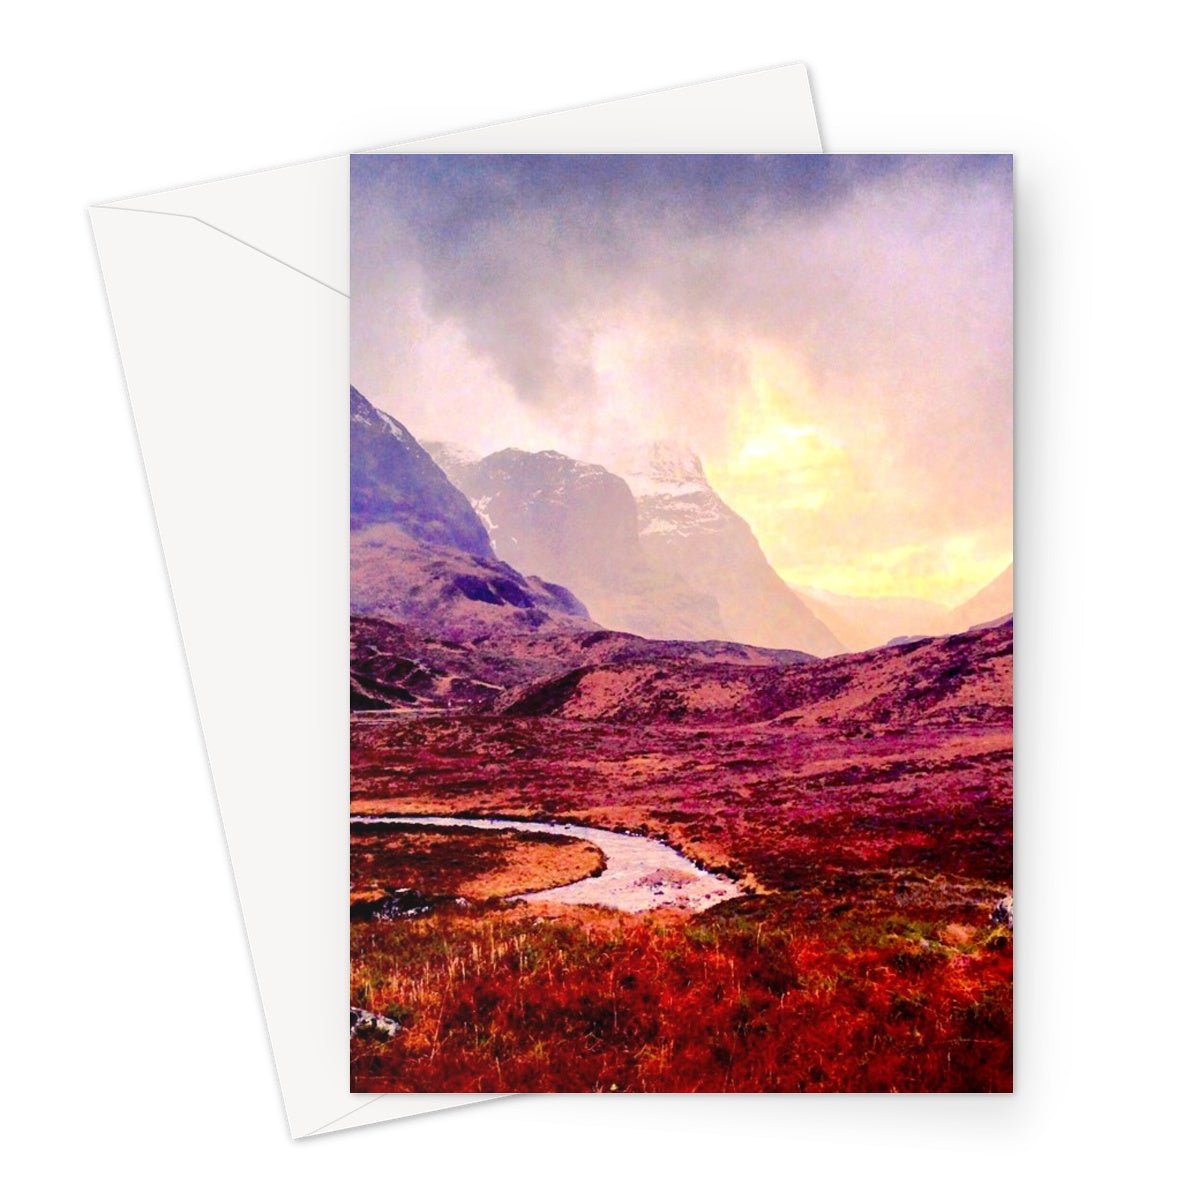 A Brooding Glencoe Art Gifts Greeting Card-Greetings Cards-Glencoe Art Gallery-A5 Portrait-1 Card-Paintings, Prints, Homeware, Art Gifts From Scotland By Scottish Artist Kevin Hunter